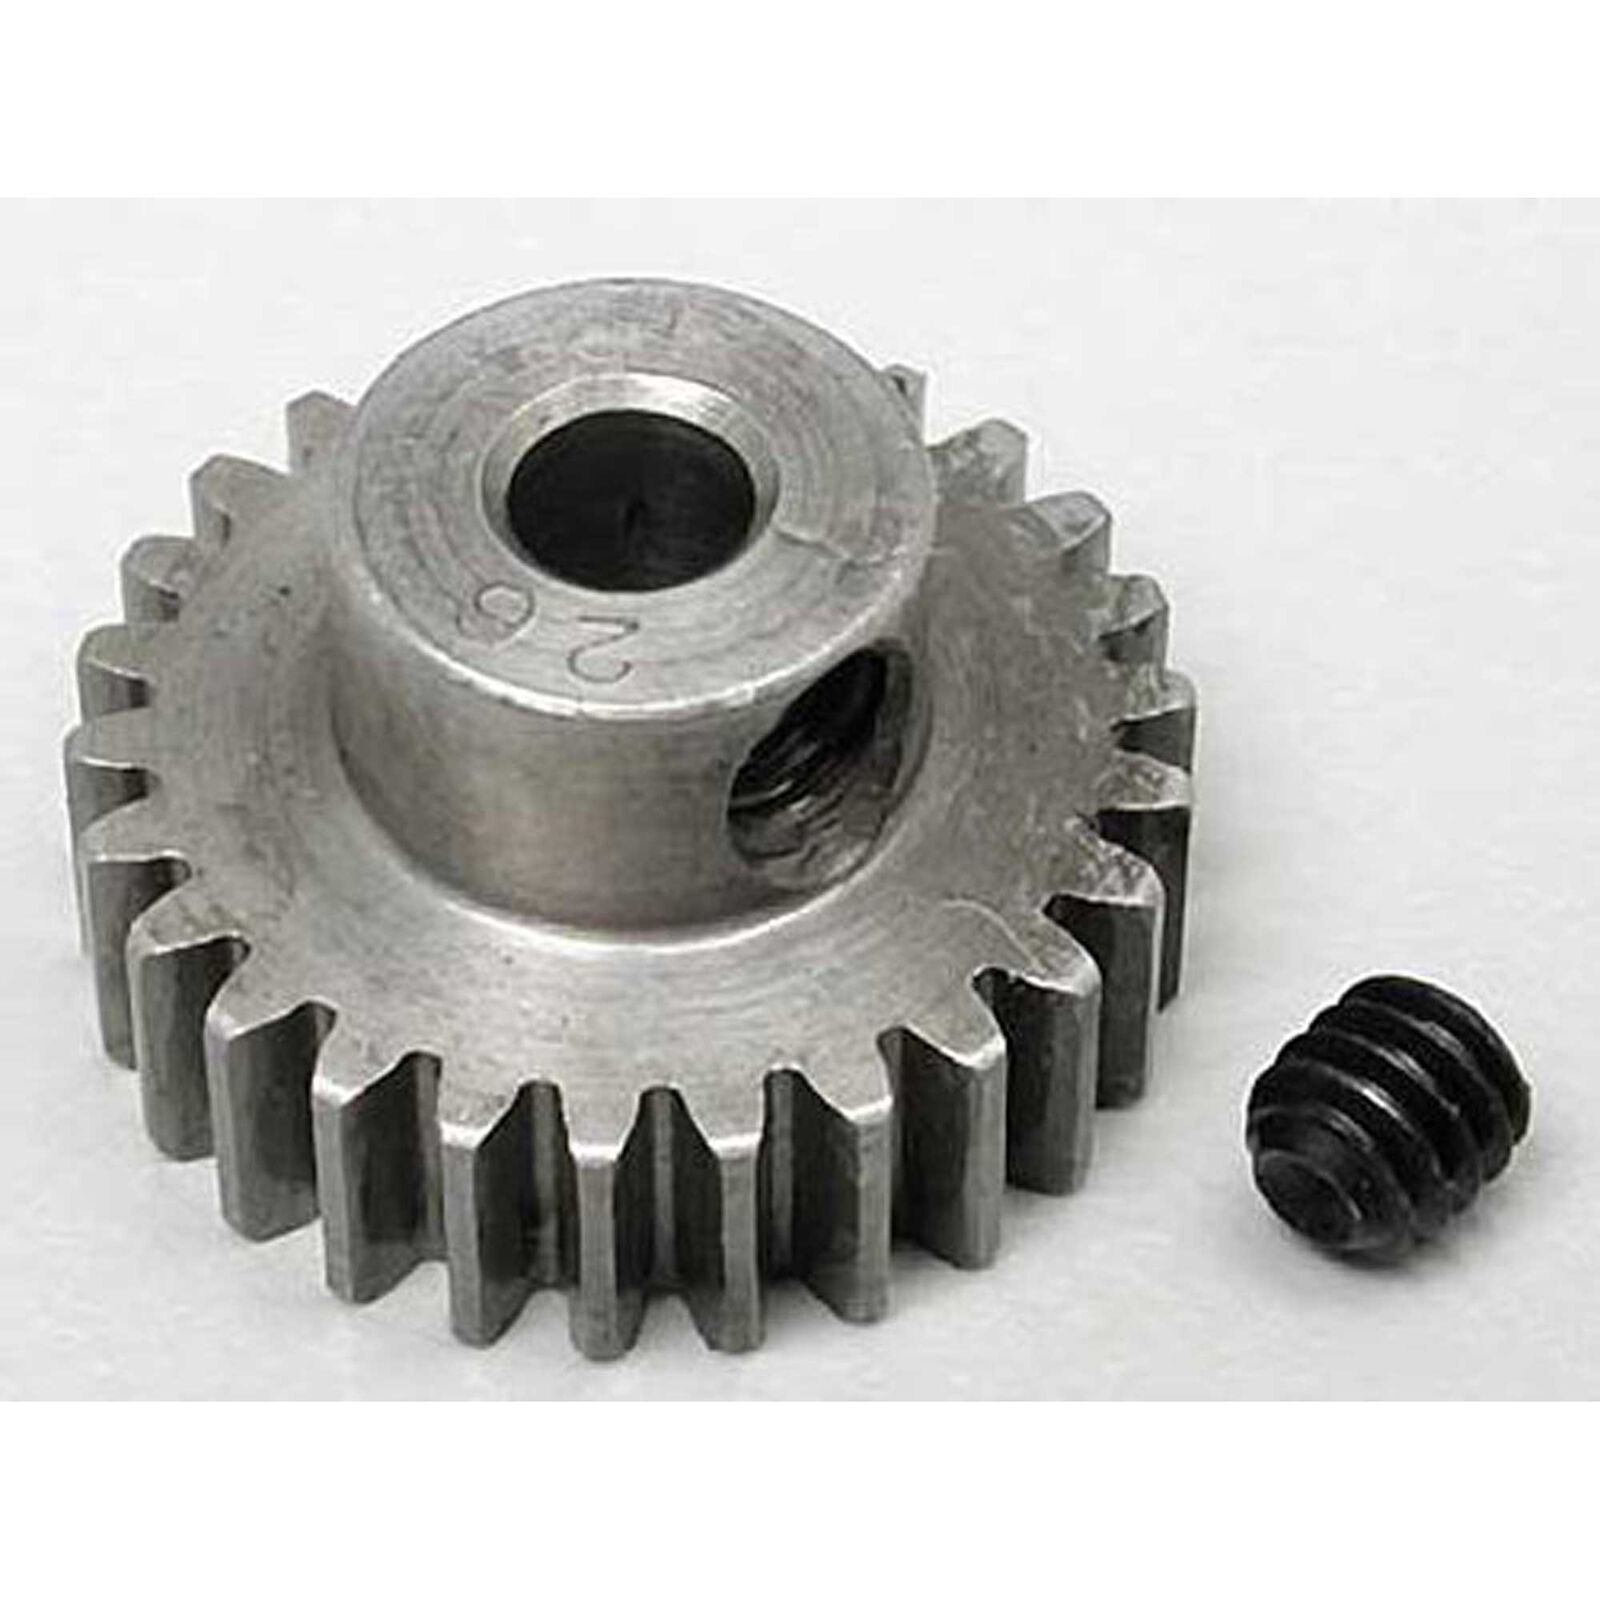 48P Absolute Pinion, 26T